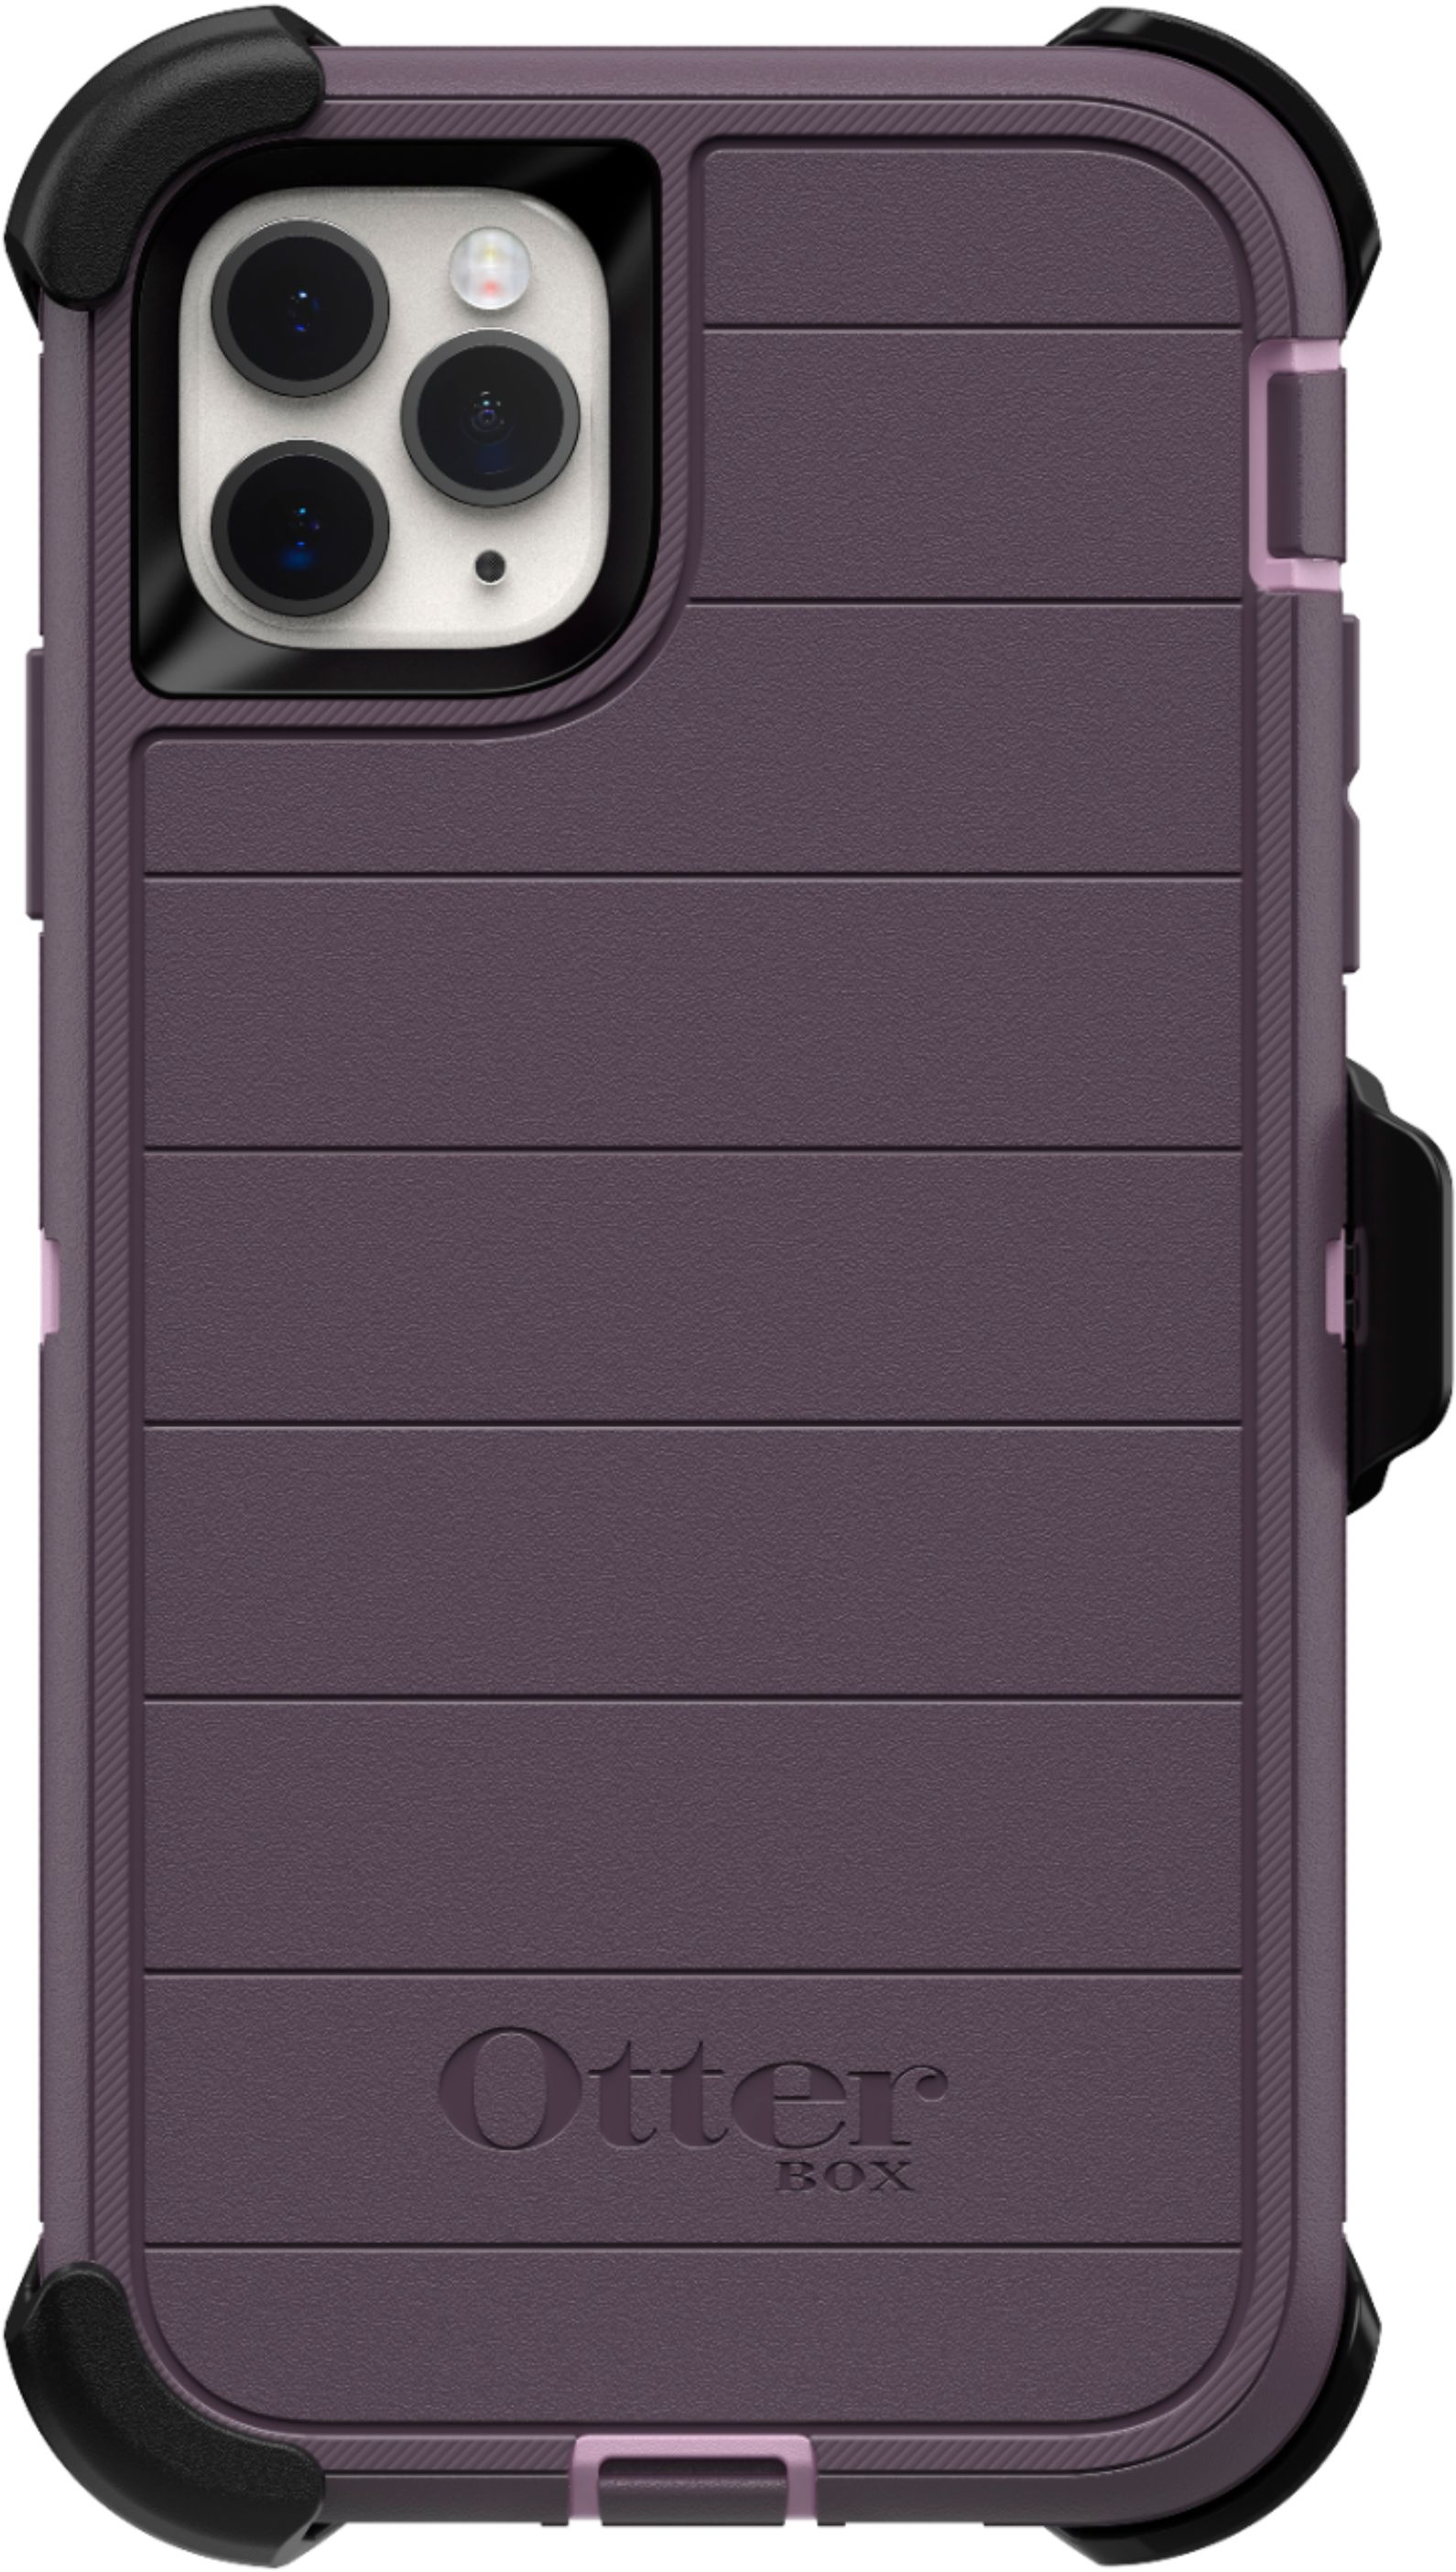 Otterbox Defender Pro Series Case For Apple Iphone 11 Pro Max Purple 77 63242 Best Buy